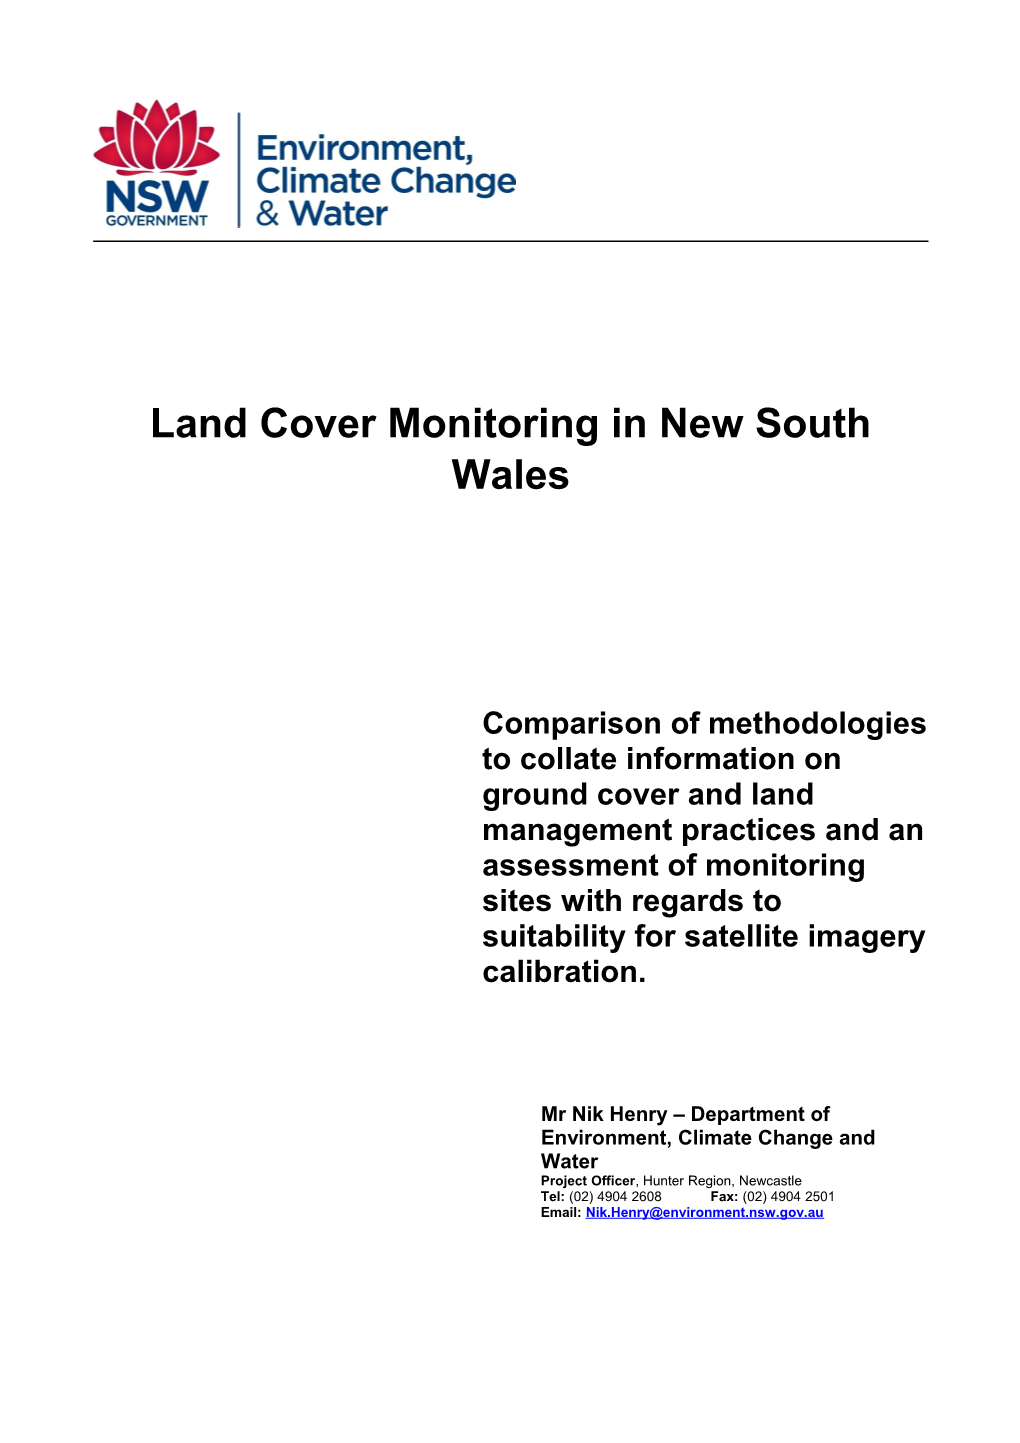 Land Cover Monitoring in New South Wales